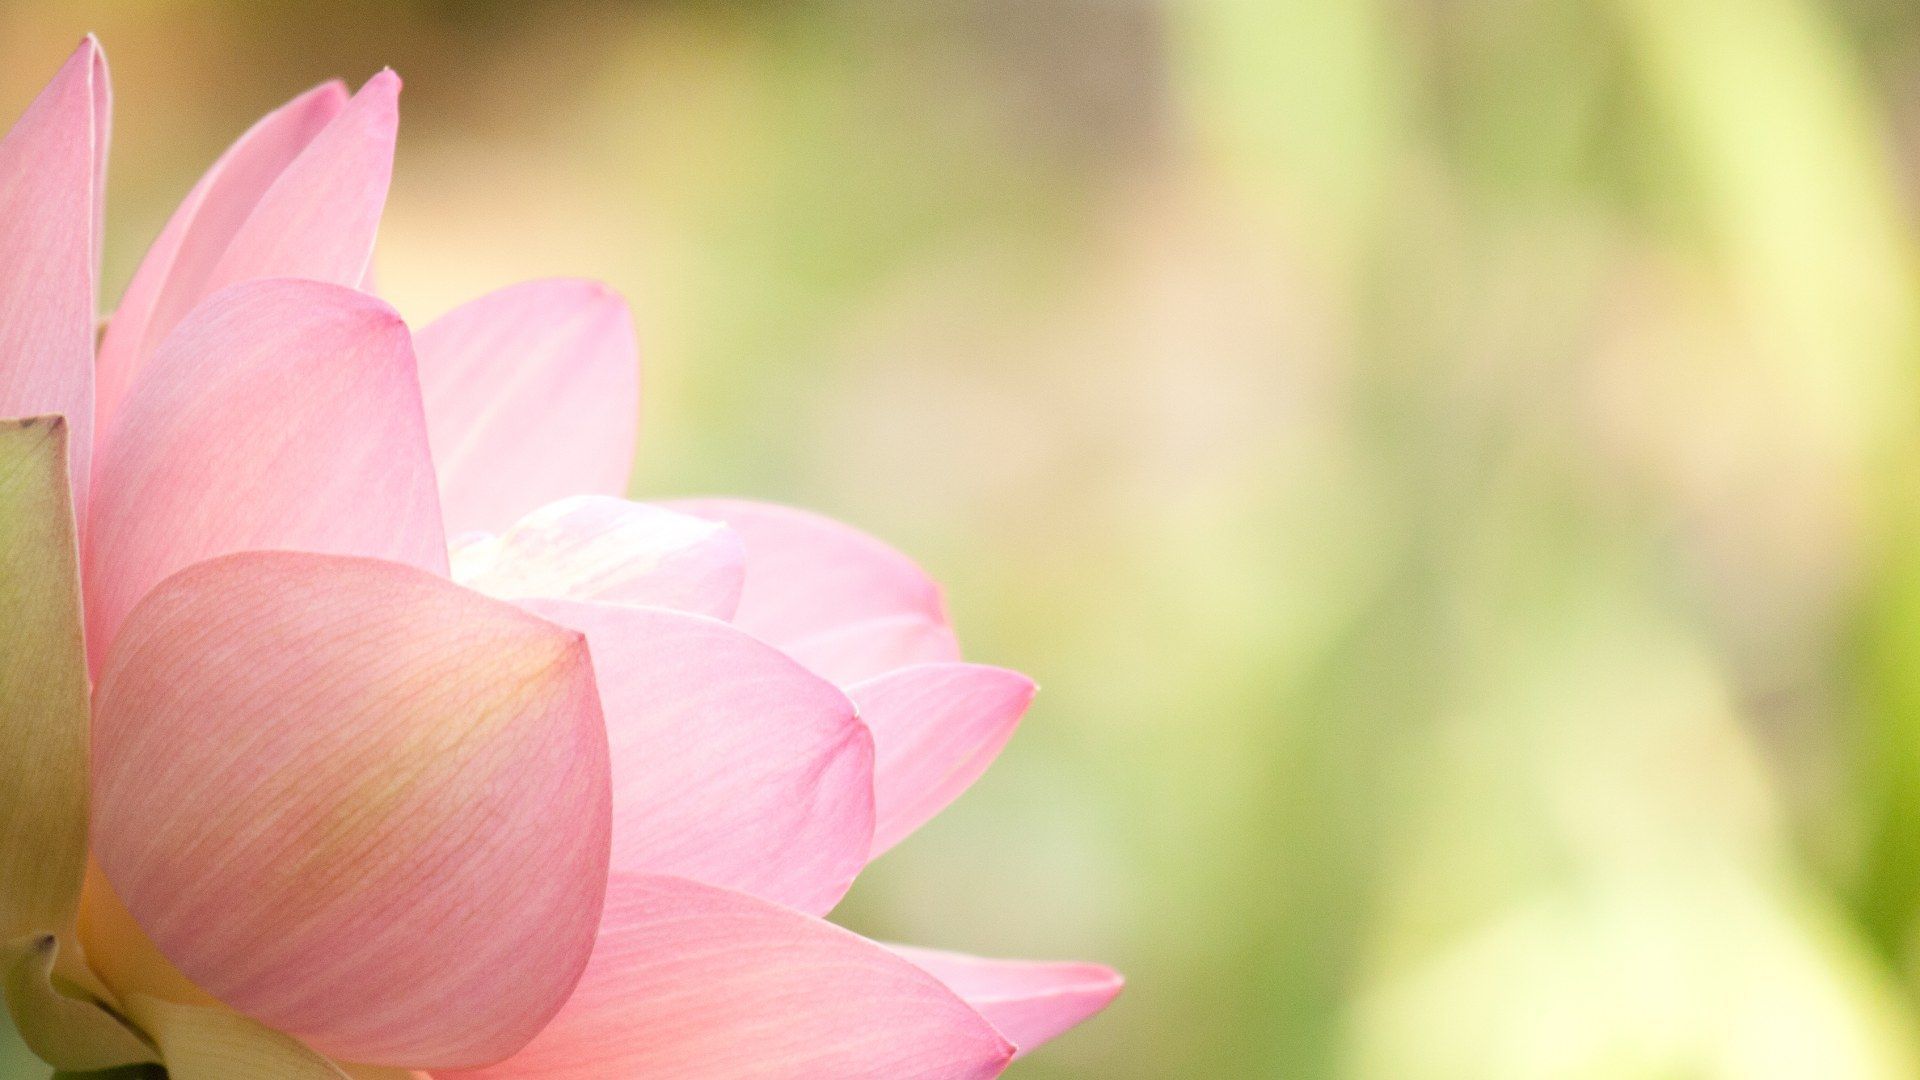 Lotus Flower Wallpaper Image Photos Pictures Background